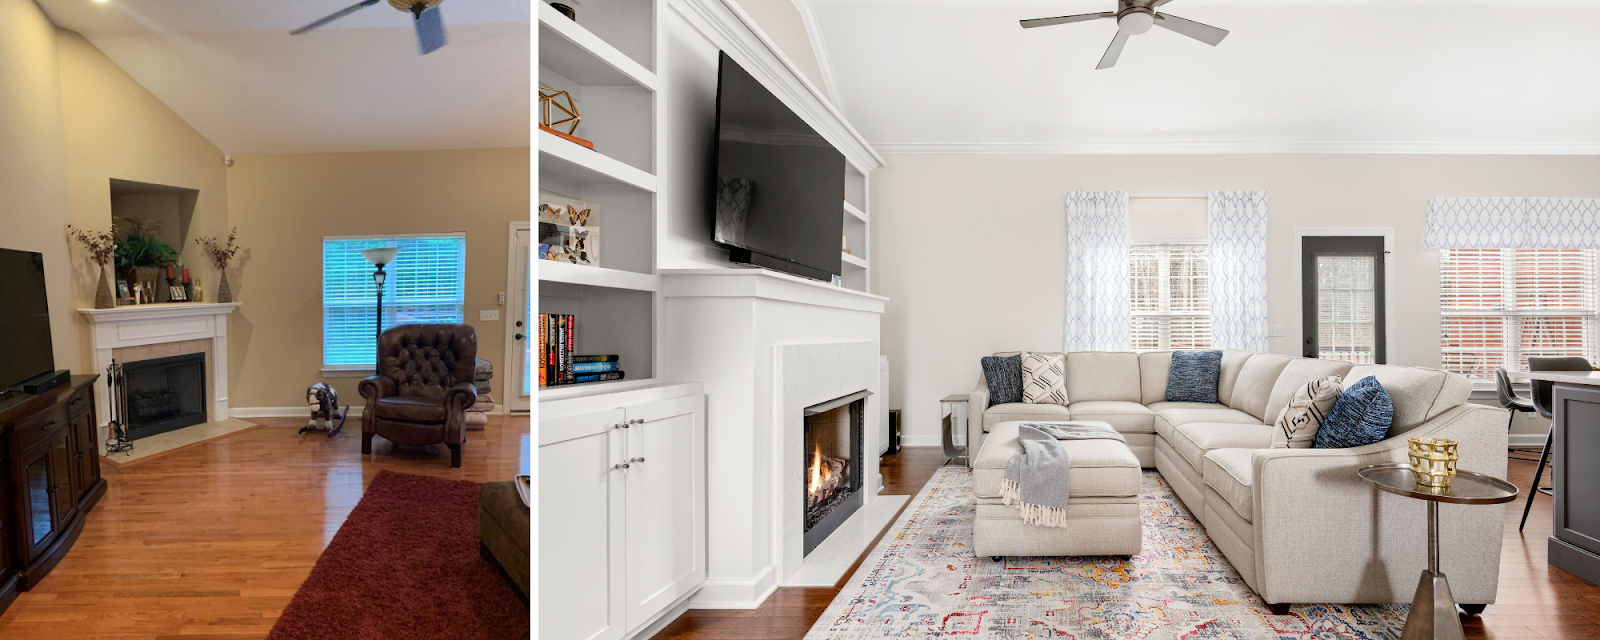 before-after-corner-fireplace-remedy-moved-to-center